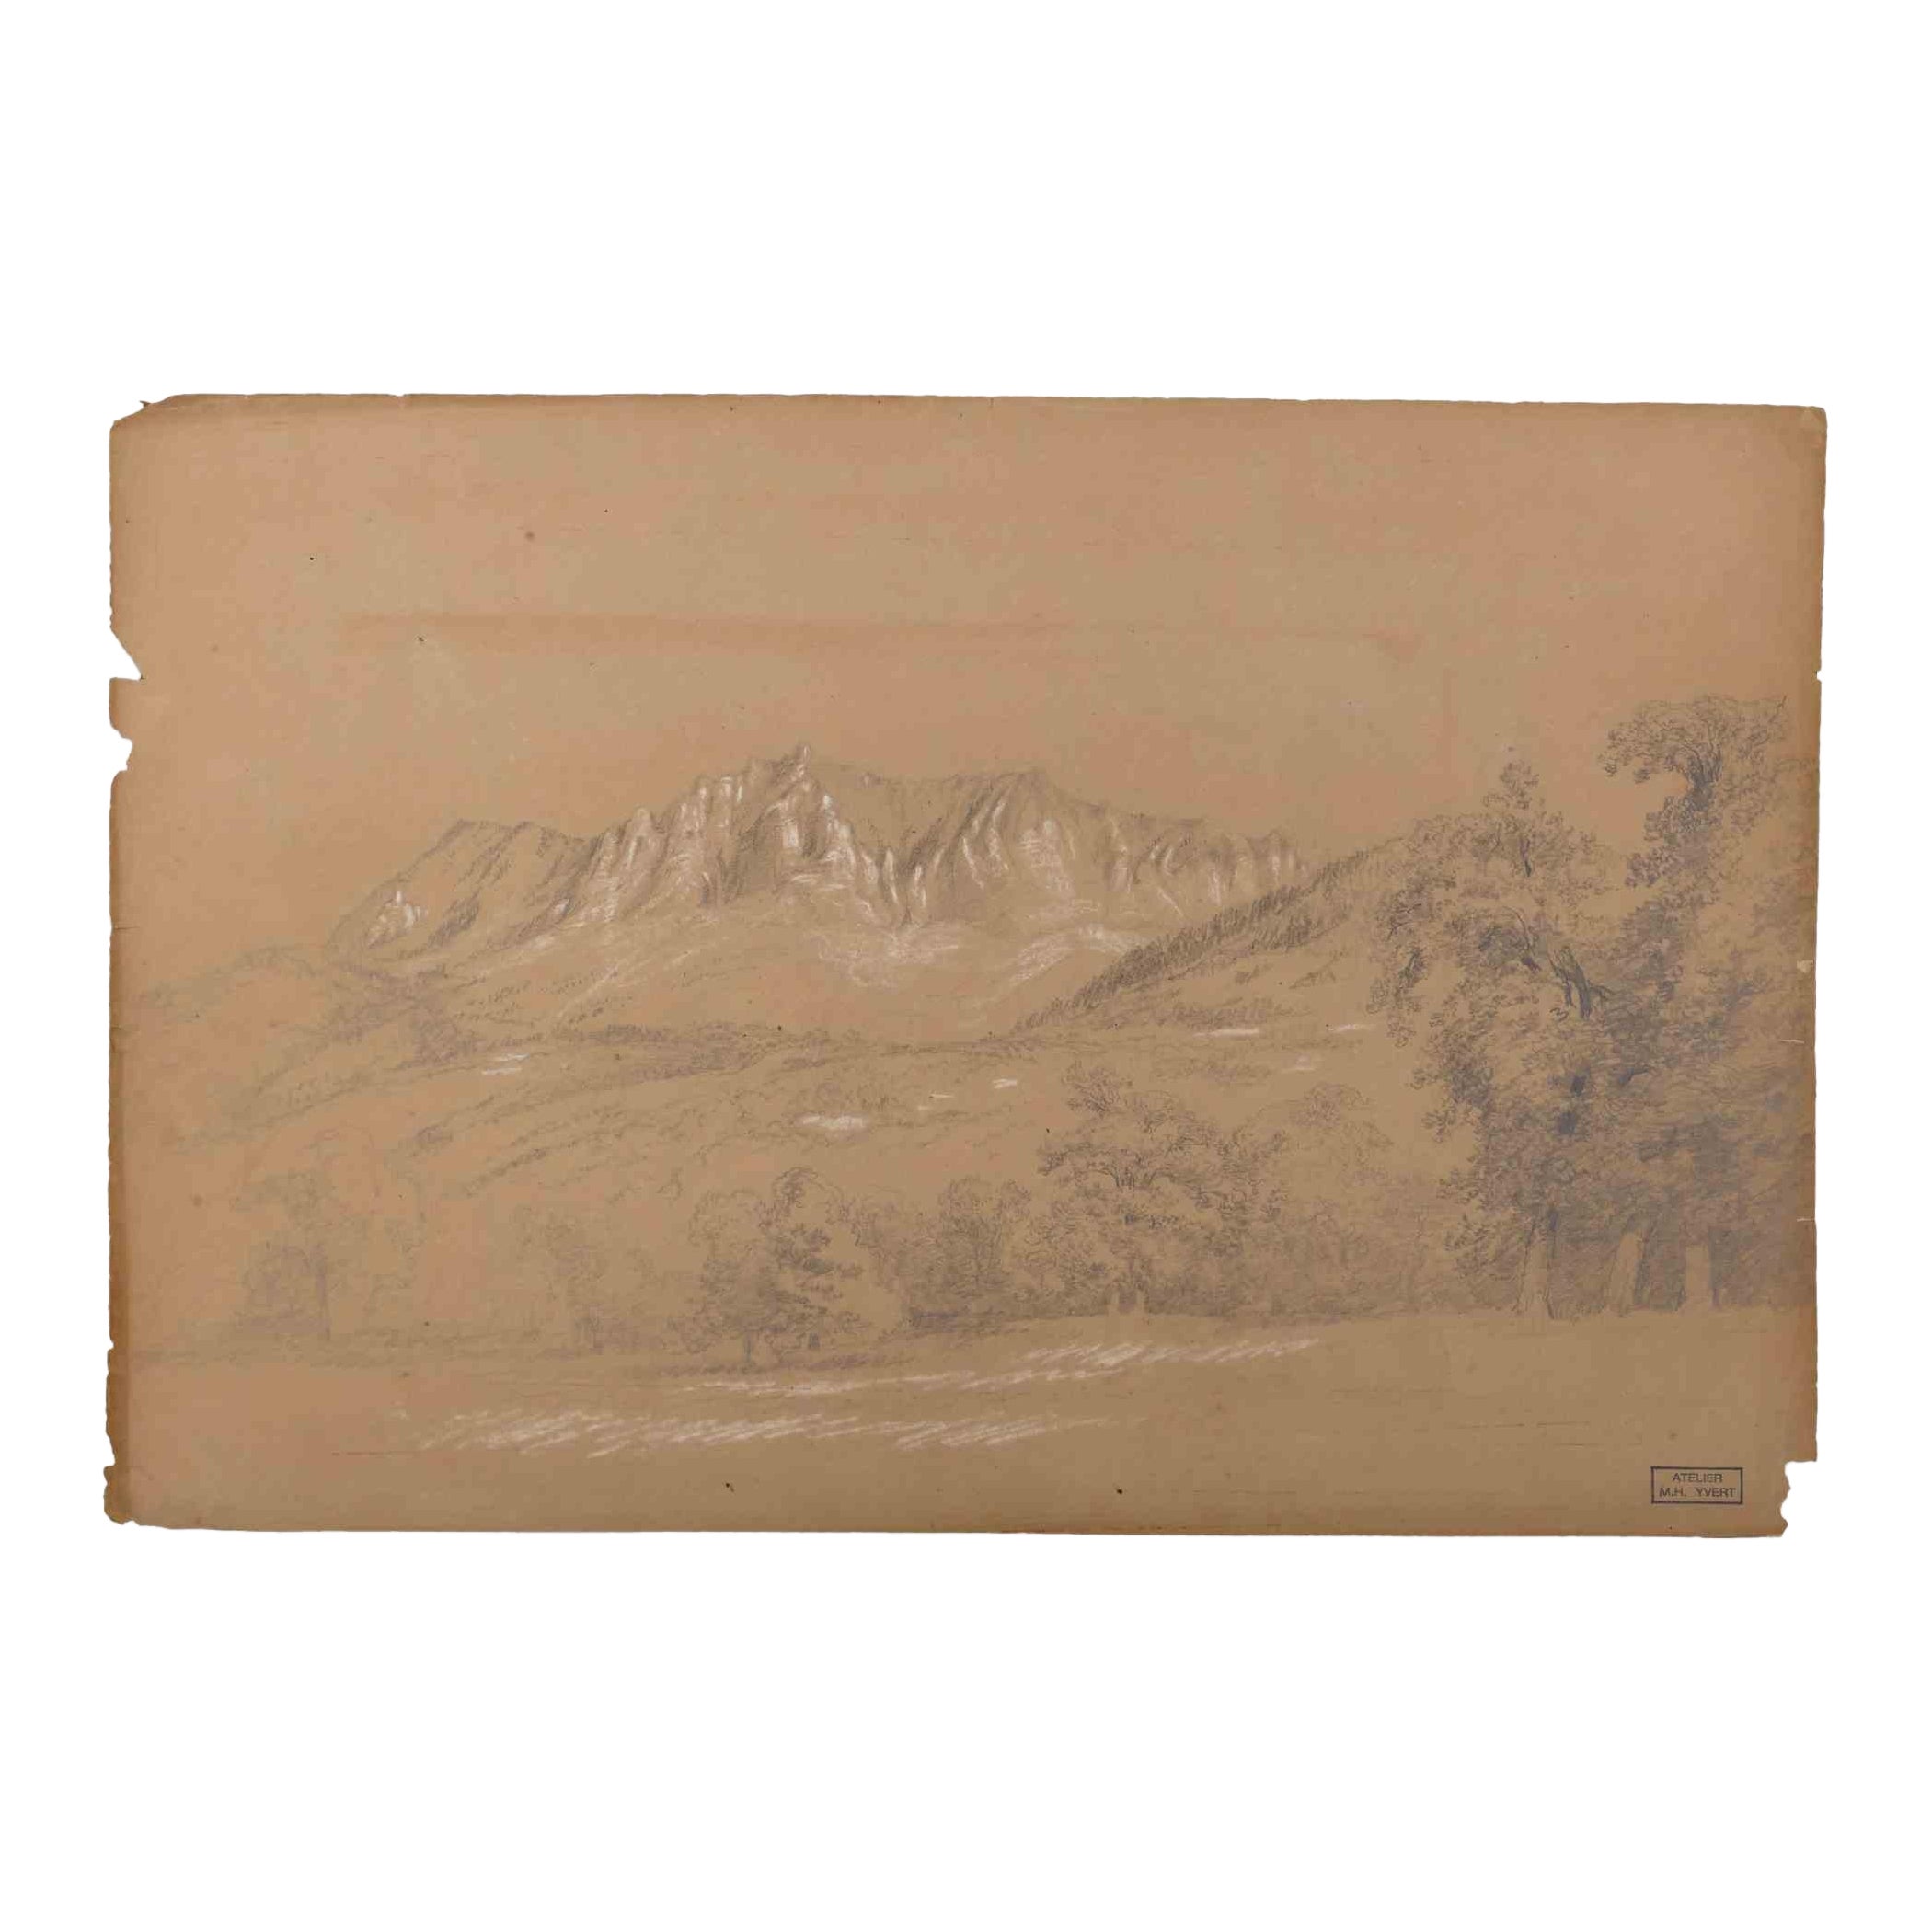 Alpine Landscape is an original Artwork, Drawing,  realized in the second half of the 19th Century by Marie Hector Yvert.

Original pencil and white chalk on brown paper. Stamp of Atelier M.H. Yvert on the right margin.  This artwork represents a